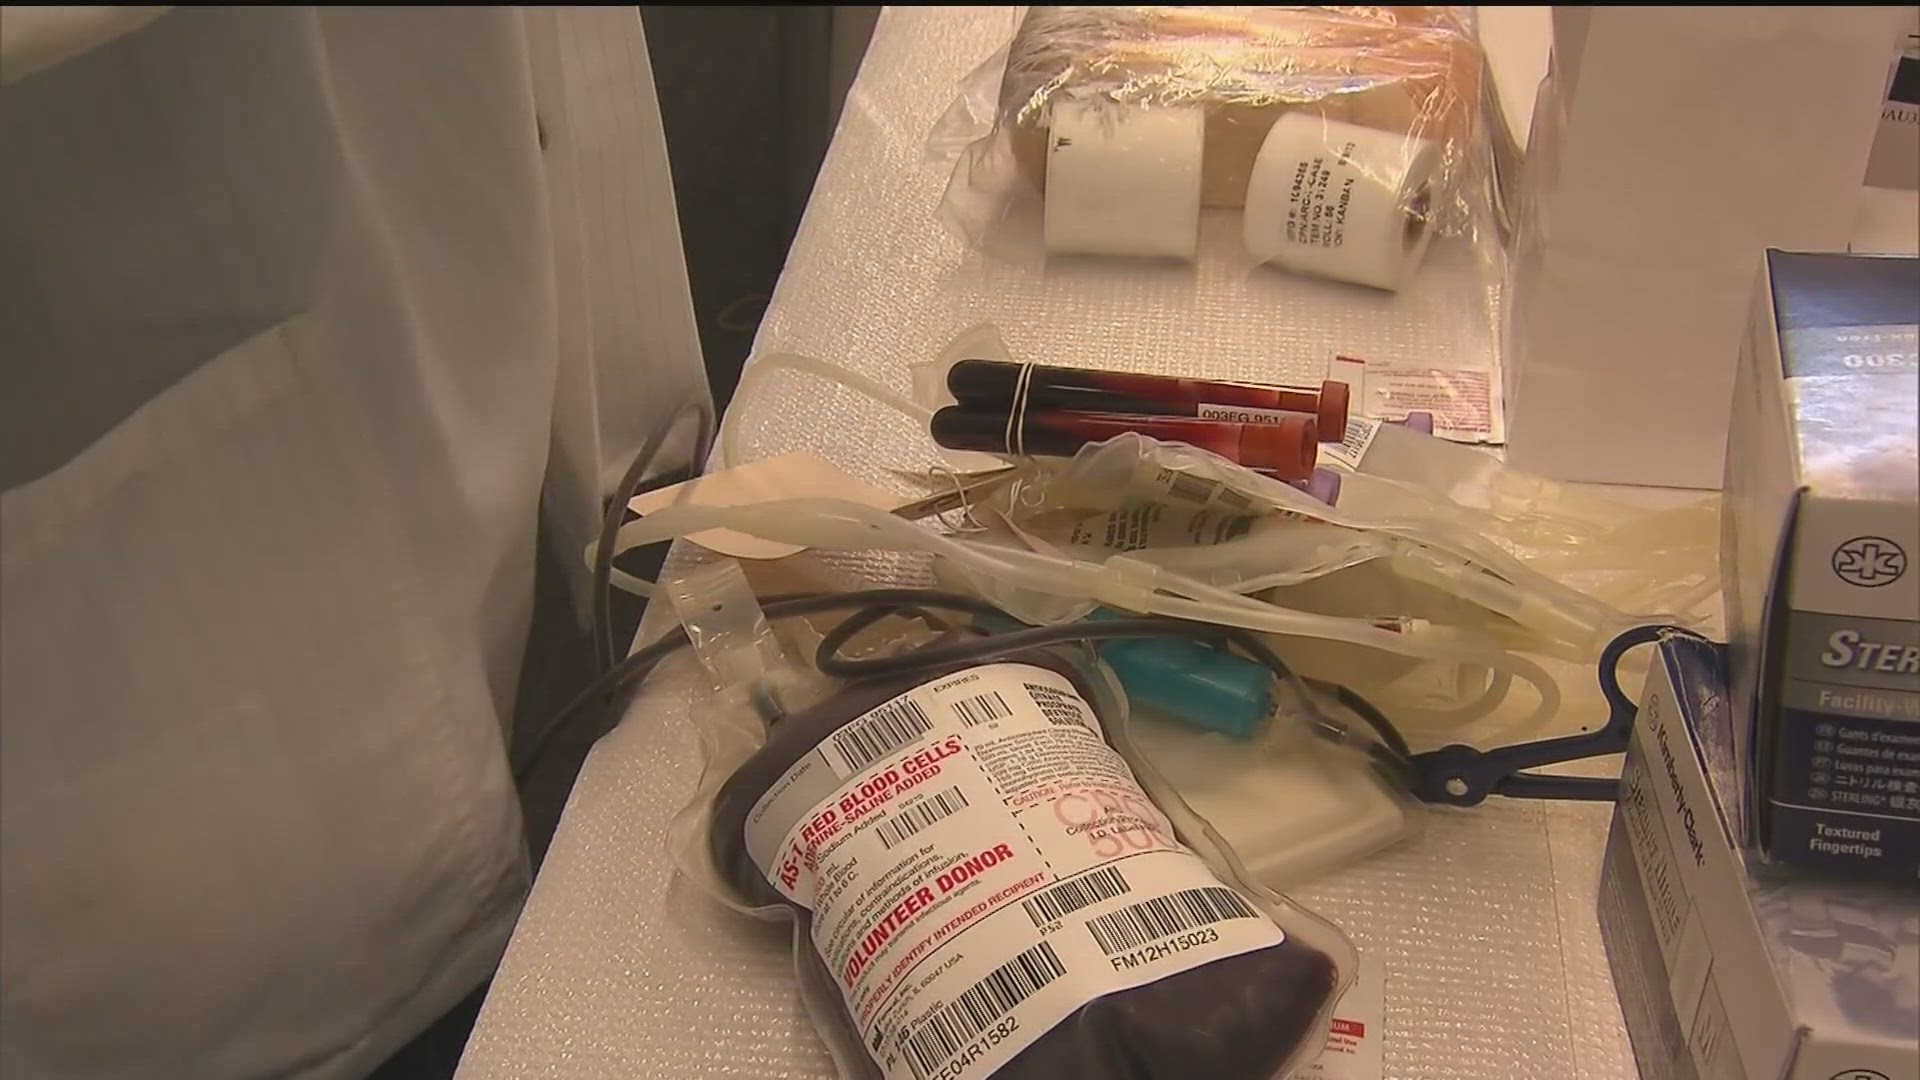 A new federal policy went into effect for some blood donation centers this week, allowing more gay, and bisexual, men to donate blood.